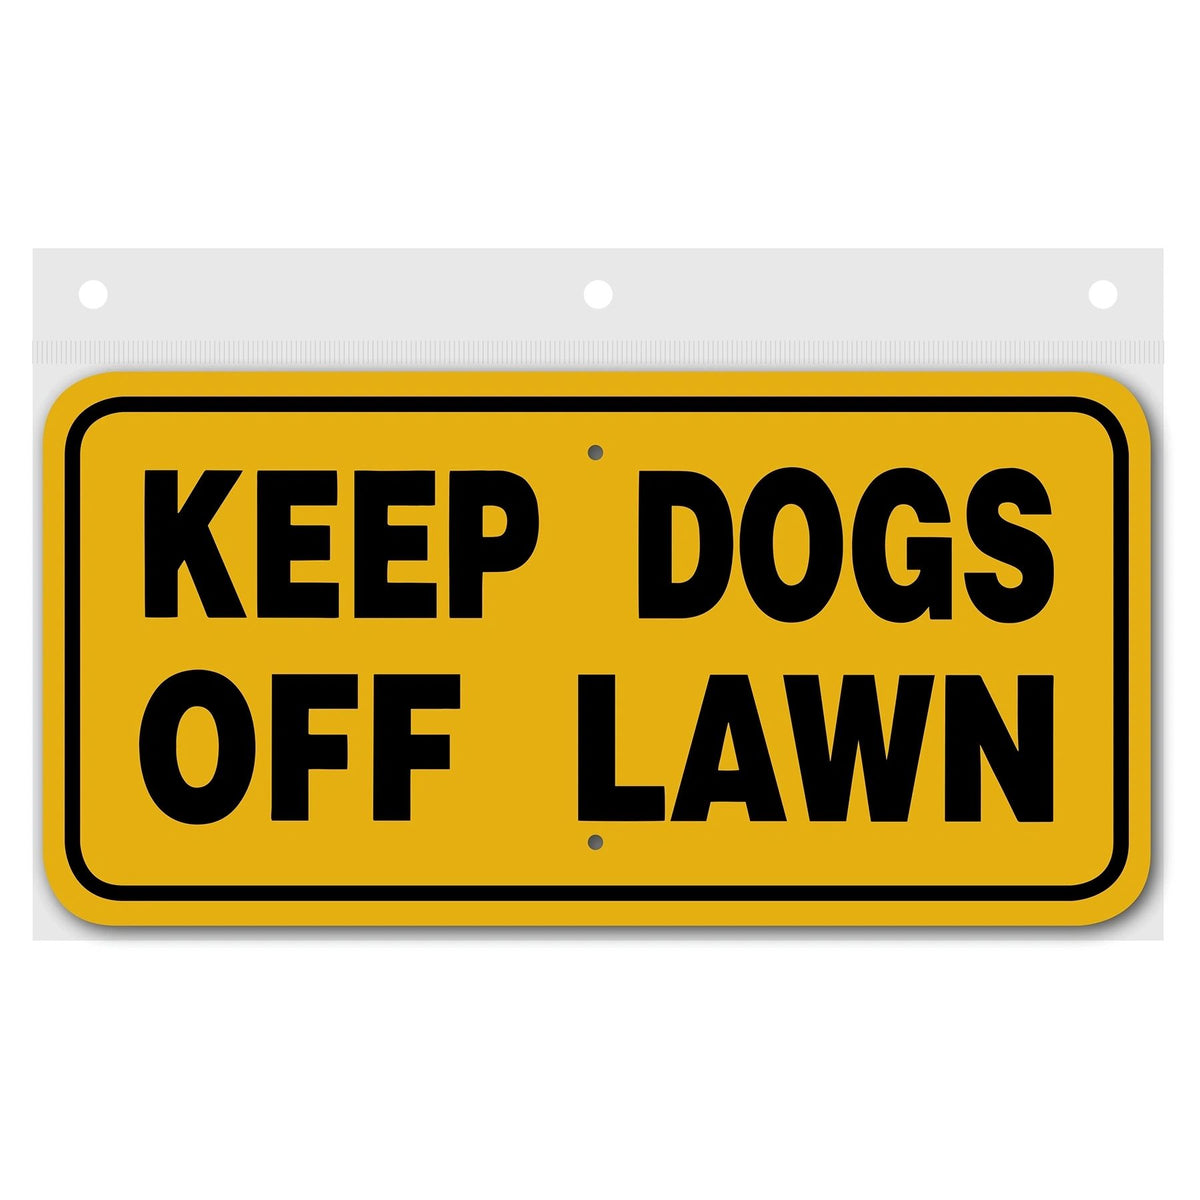 Keep Dogs Off Lawn Sign Aluminum 6 in X 12 in #3444414